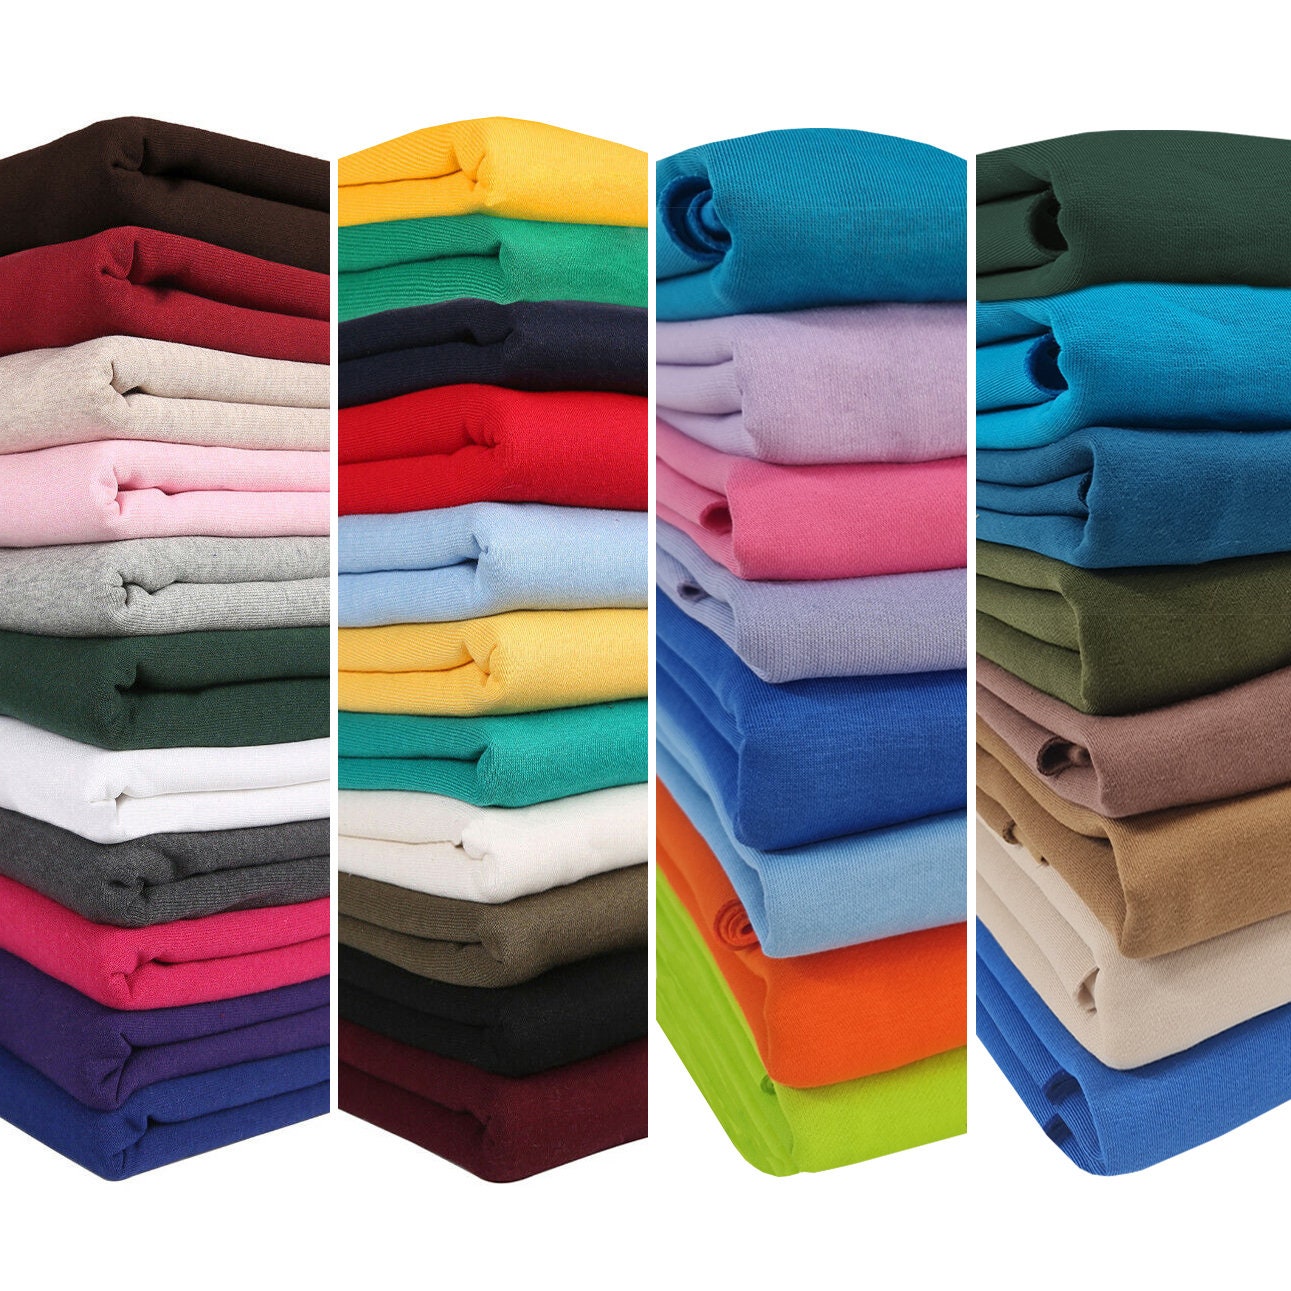 Sweatshirt Fleece Fabric Jersey,premium Quality Hoodie Fabric 260g  Weight,british Made.35 Colors Neotrims.5 Meters Continuous Length Bestbuy 